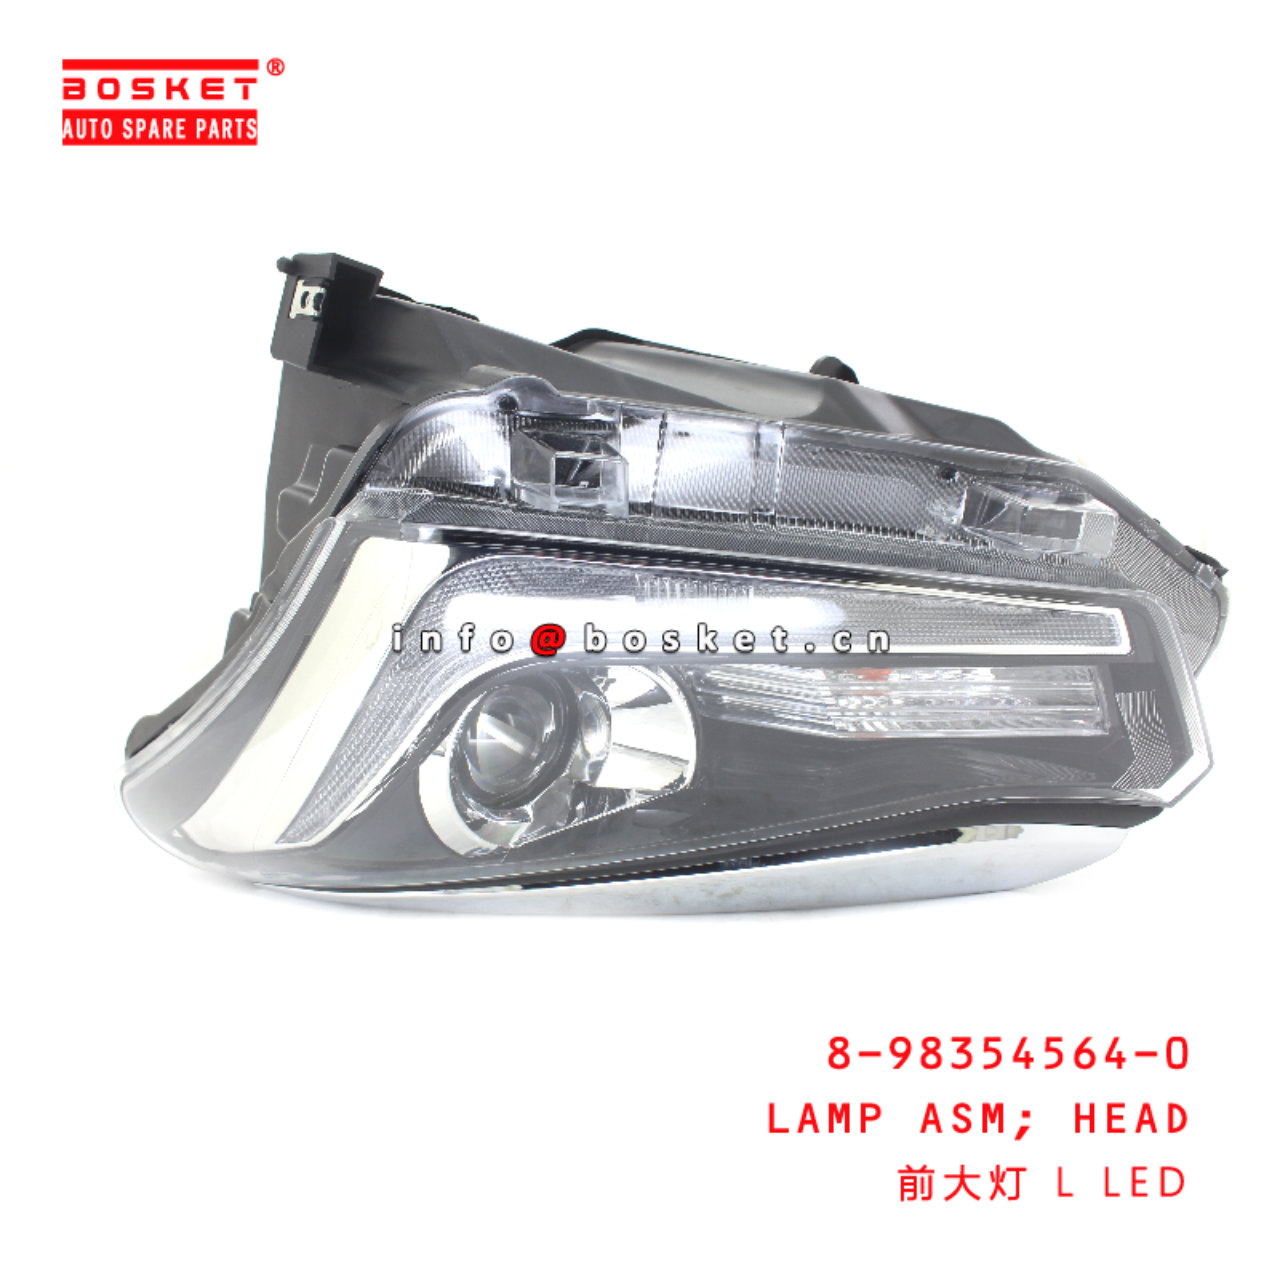 8-98354564-0 Head Lamp Assembly suitable for ISUZU DMAX2019  8983545640